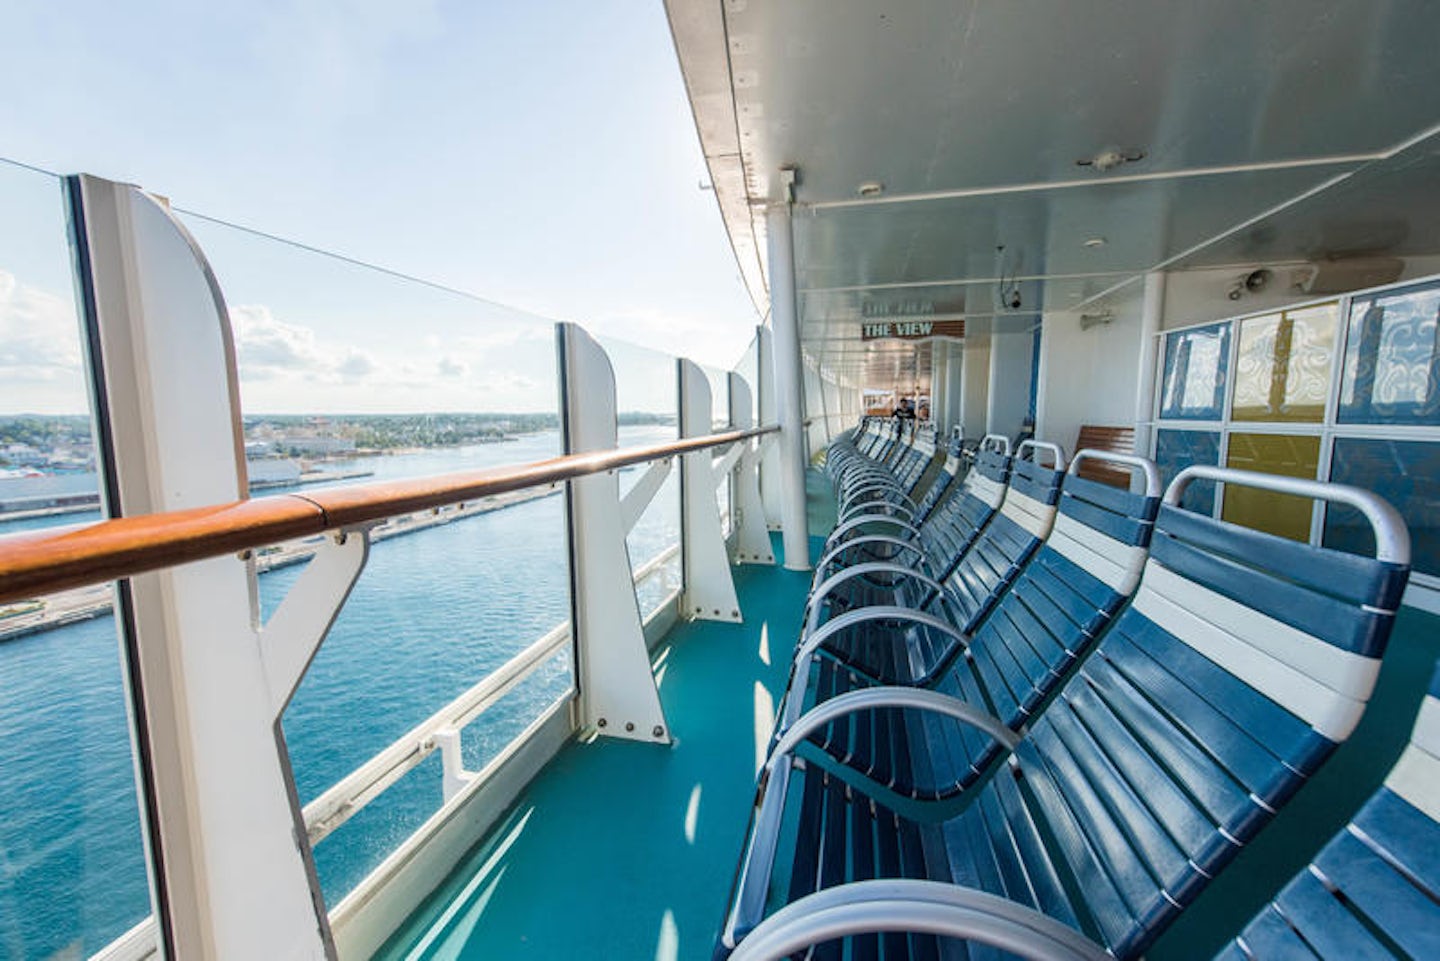 The View Deck on Oasis of the Seas